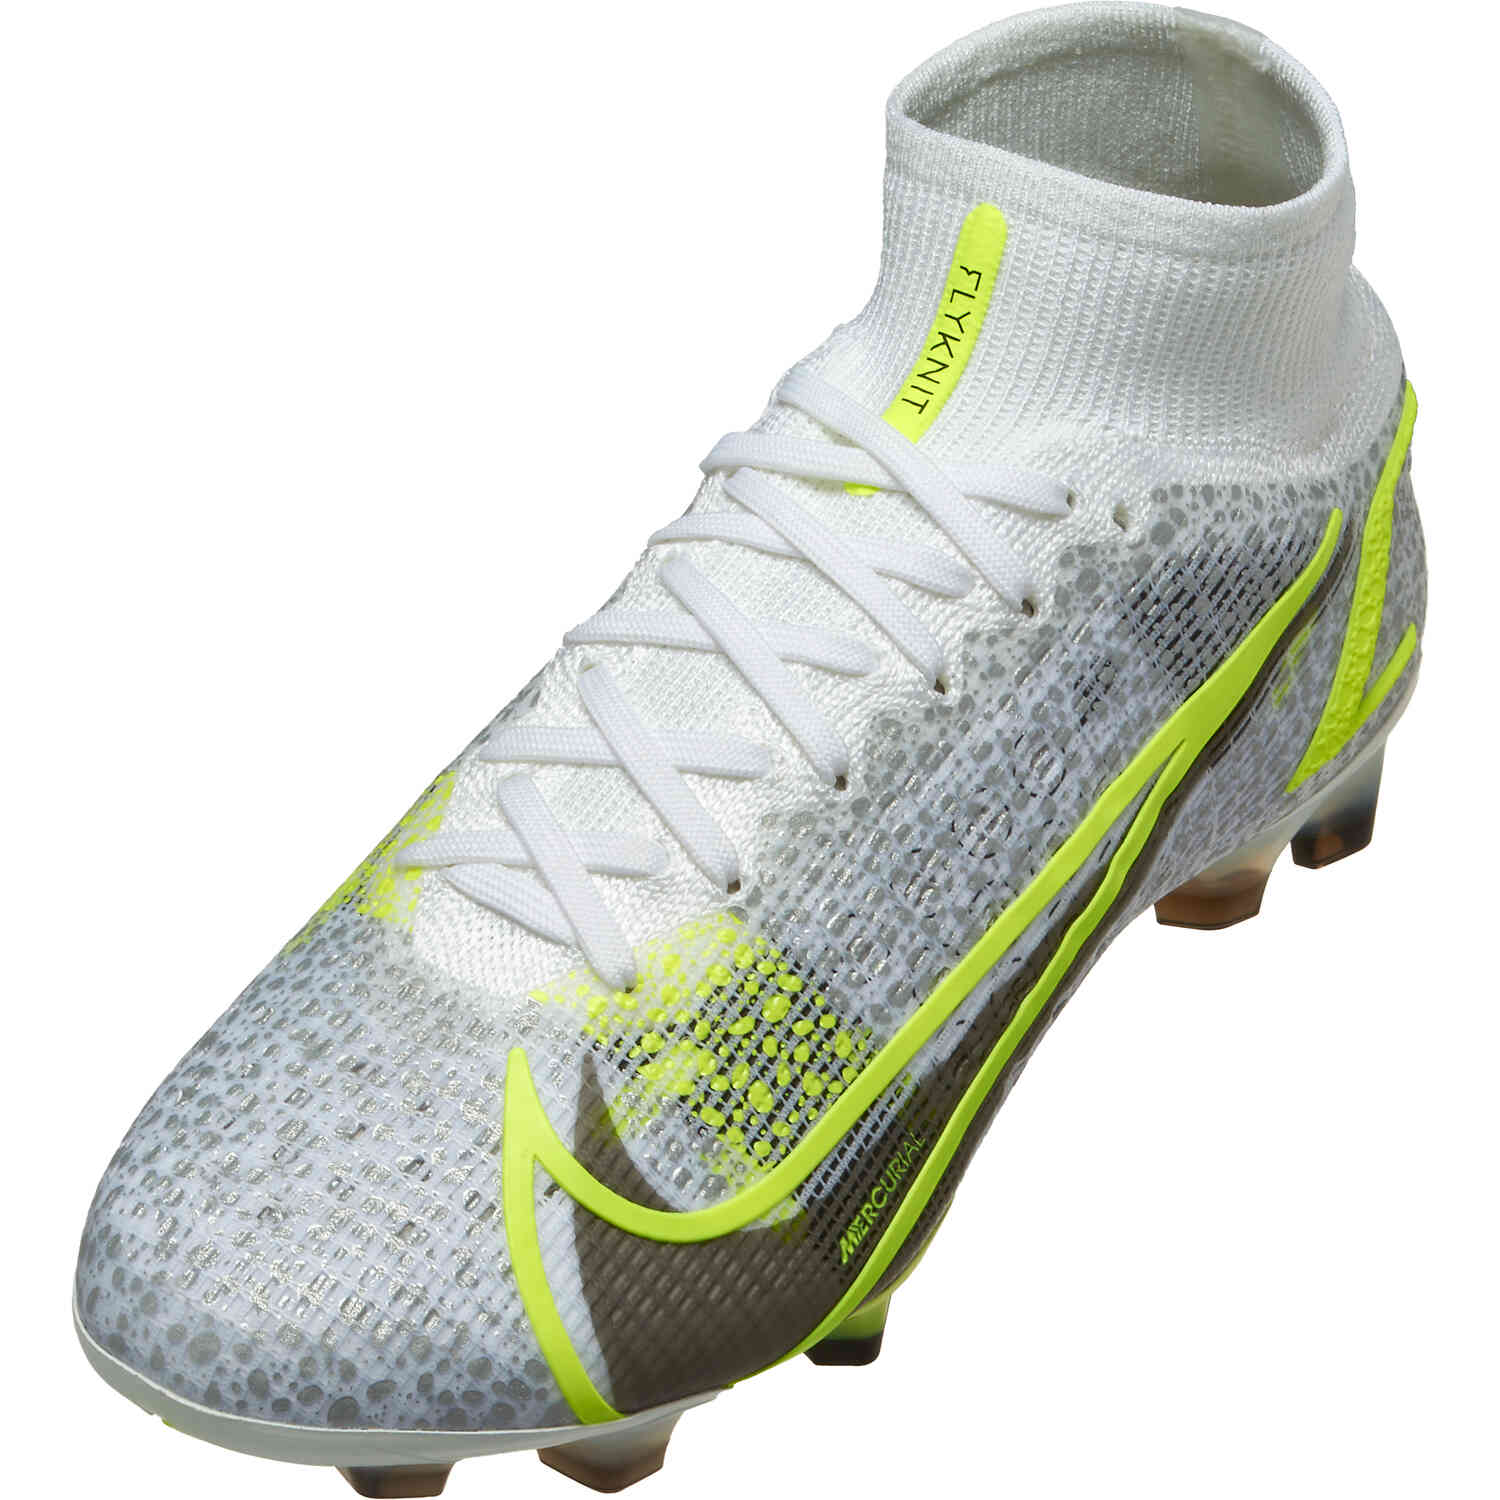 silver soccer cleats